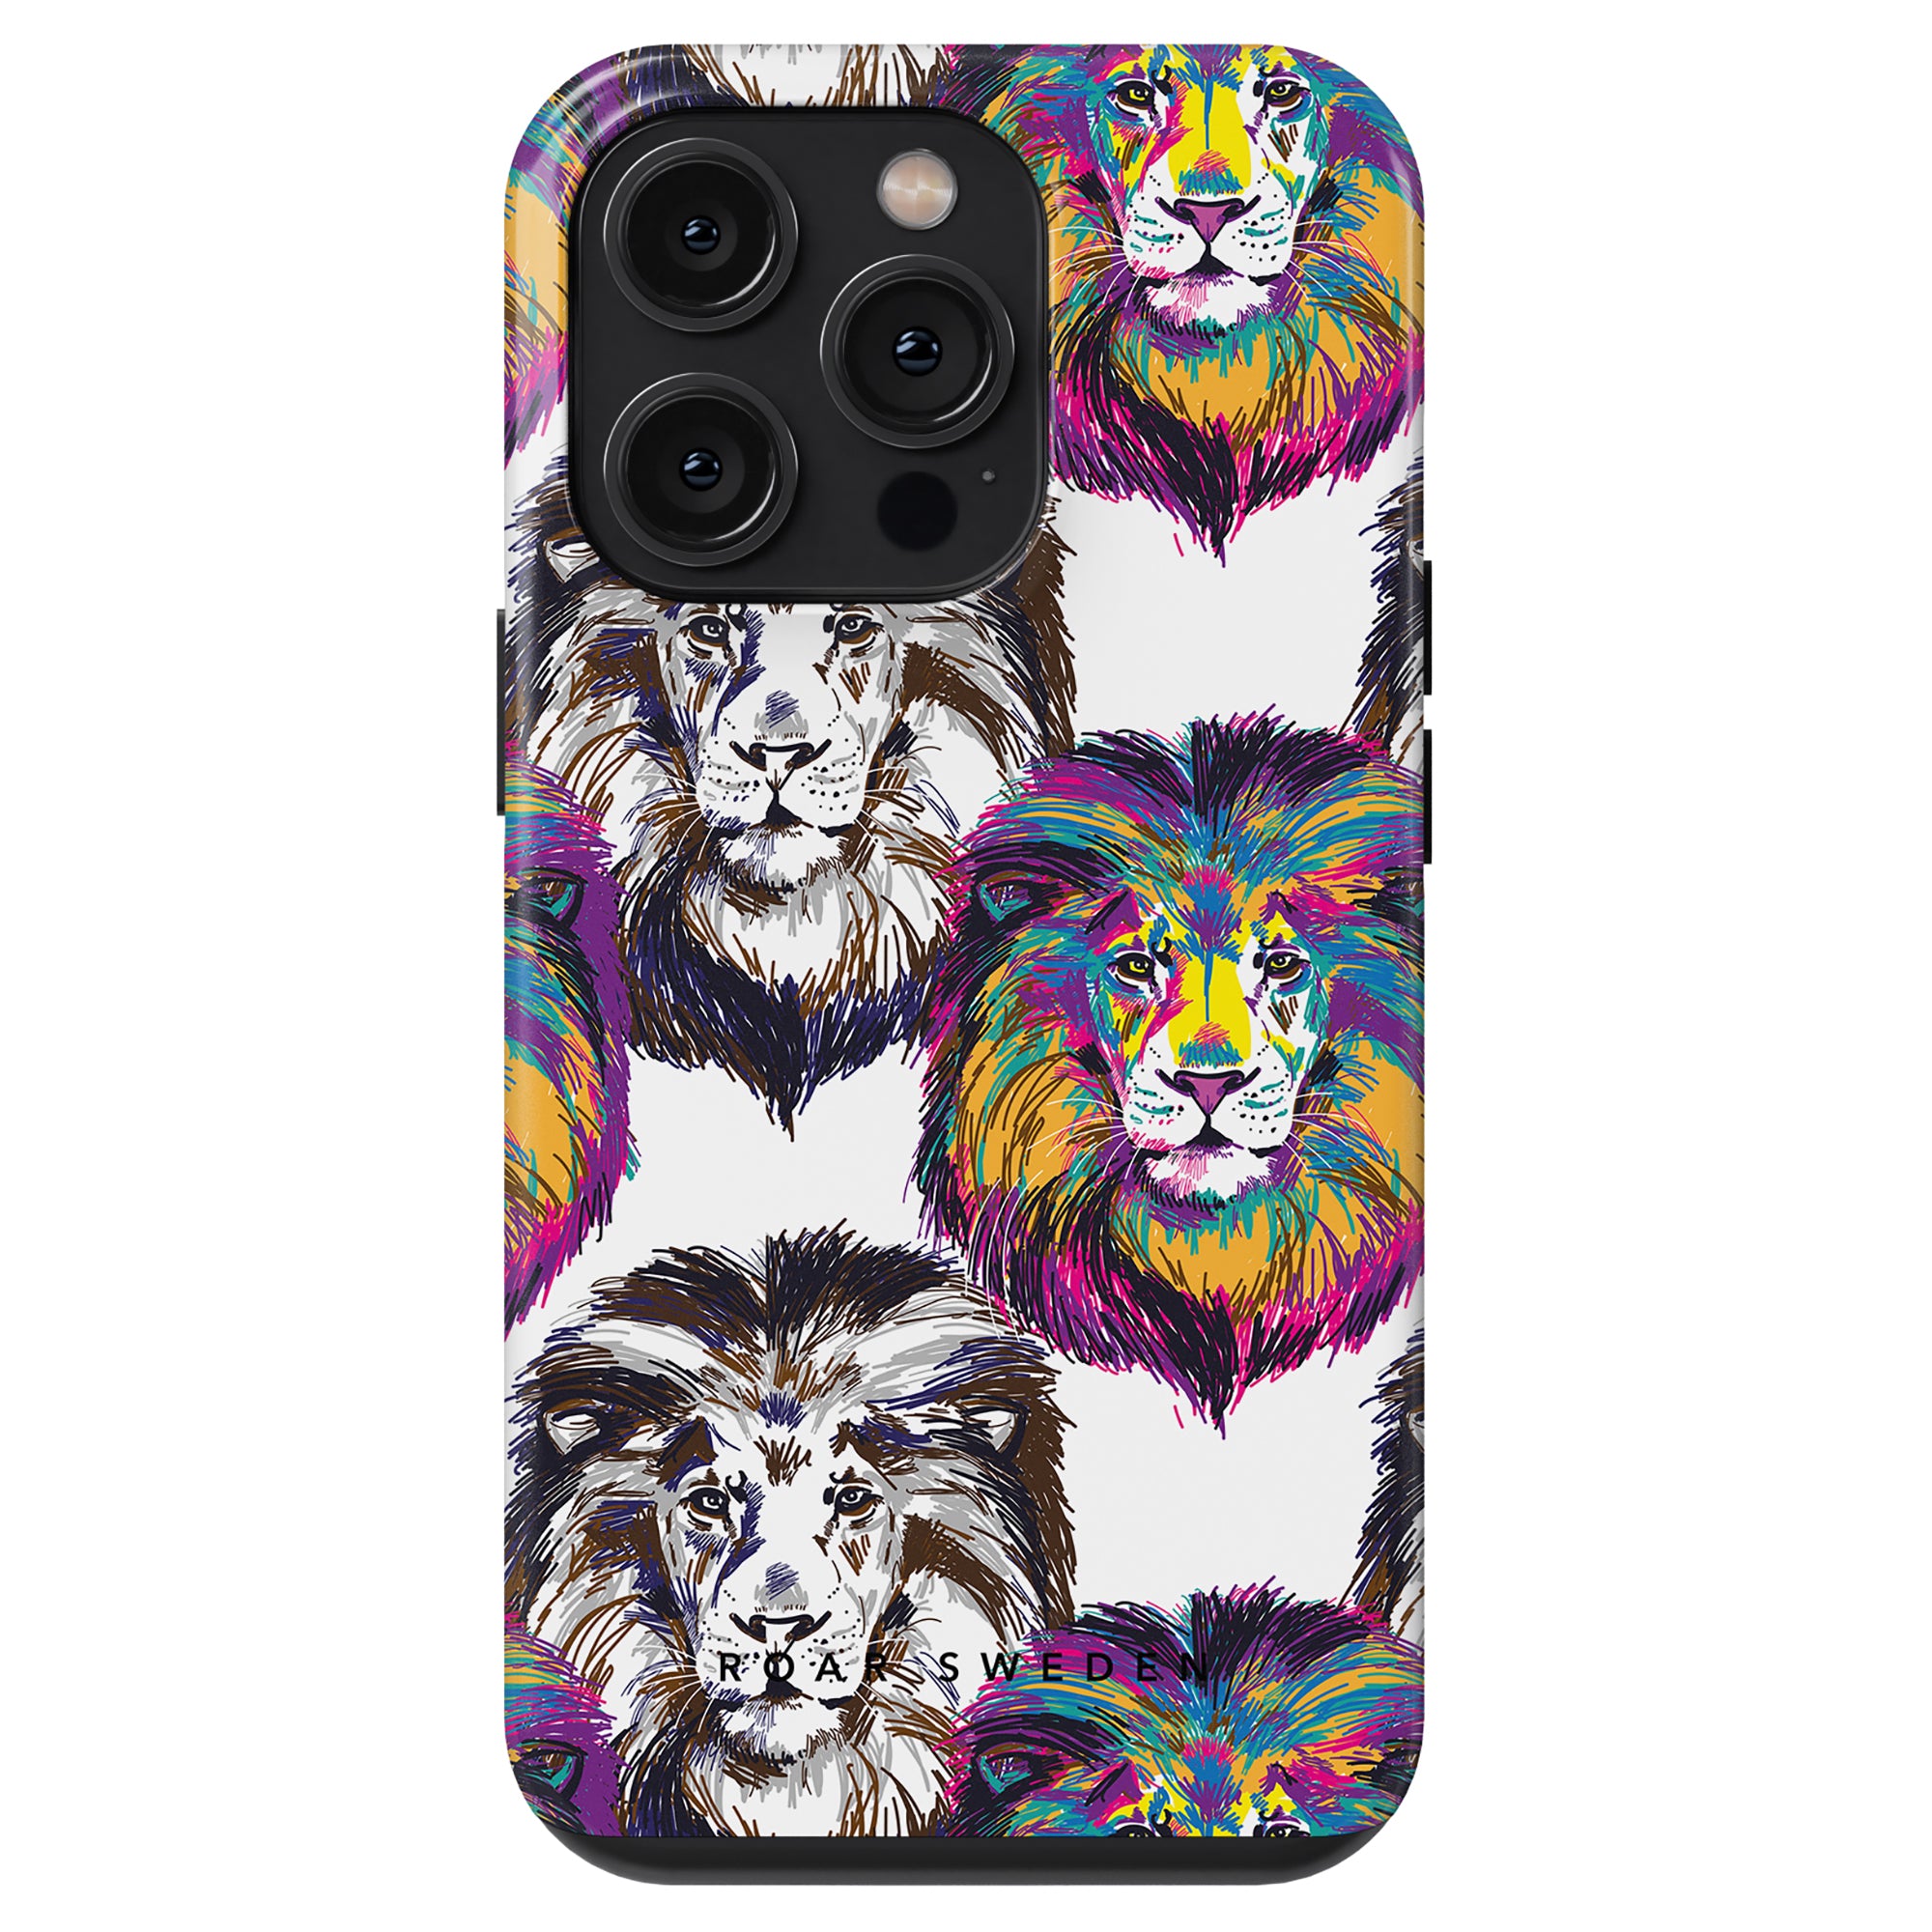 Simba - Tough Case featuring a colorful pattern of lion faces in various expressive styles, with cutouts for camera lenses.